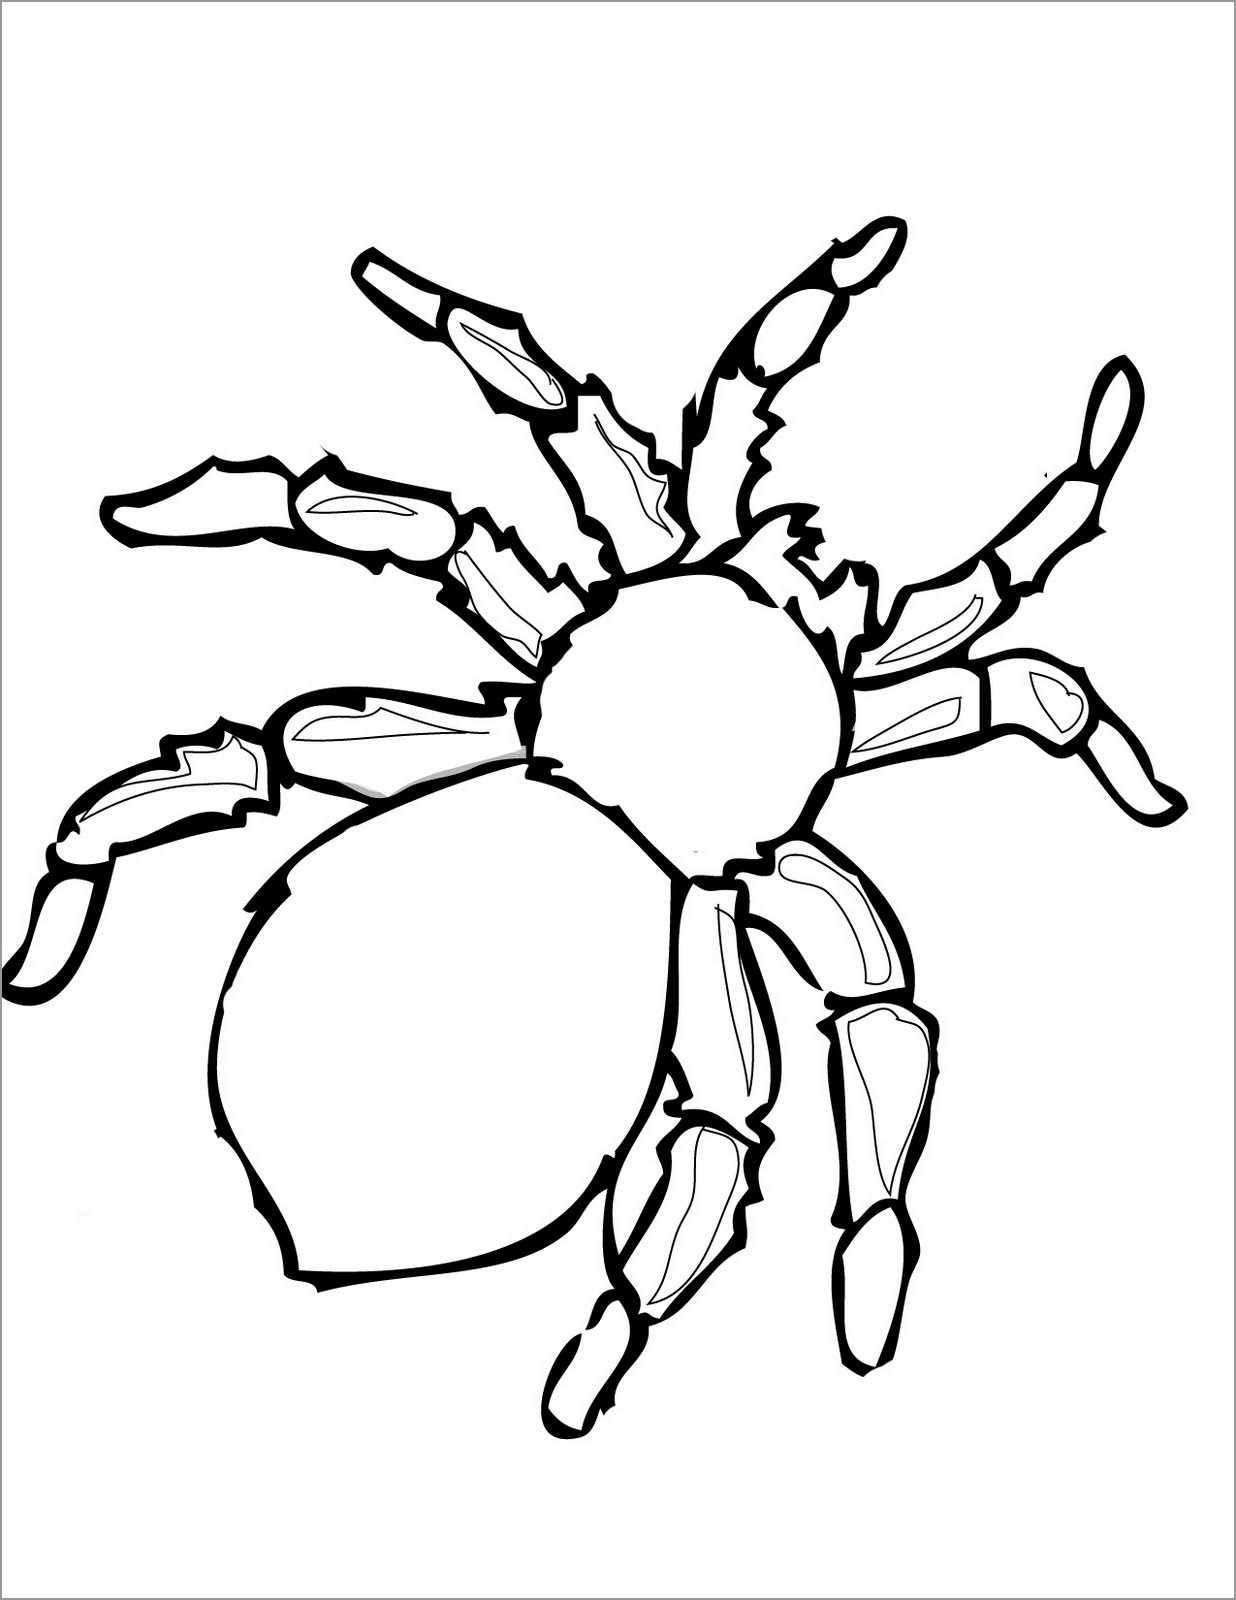 Spider Coloring Pages for Kids